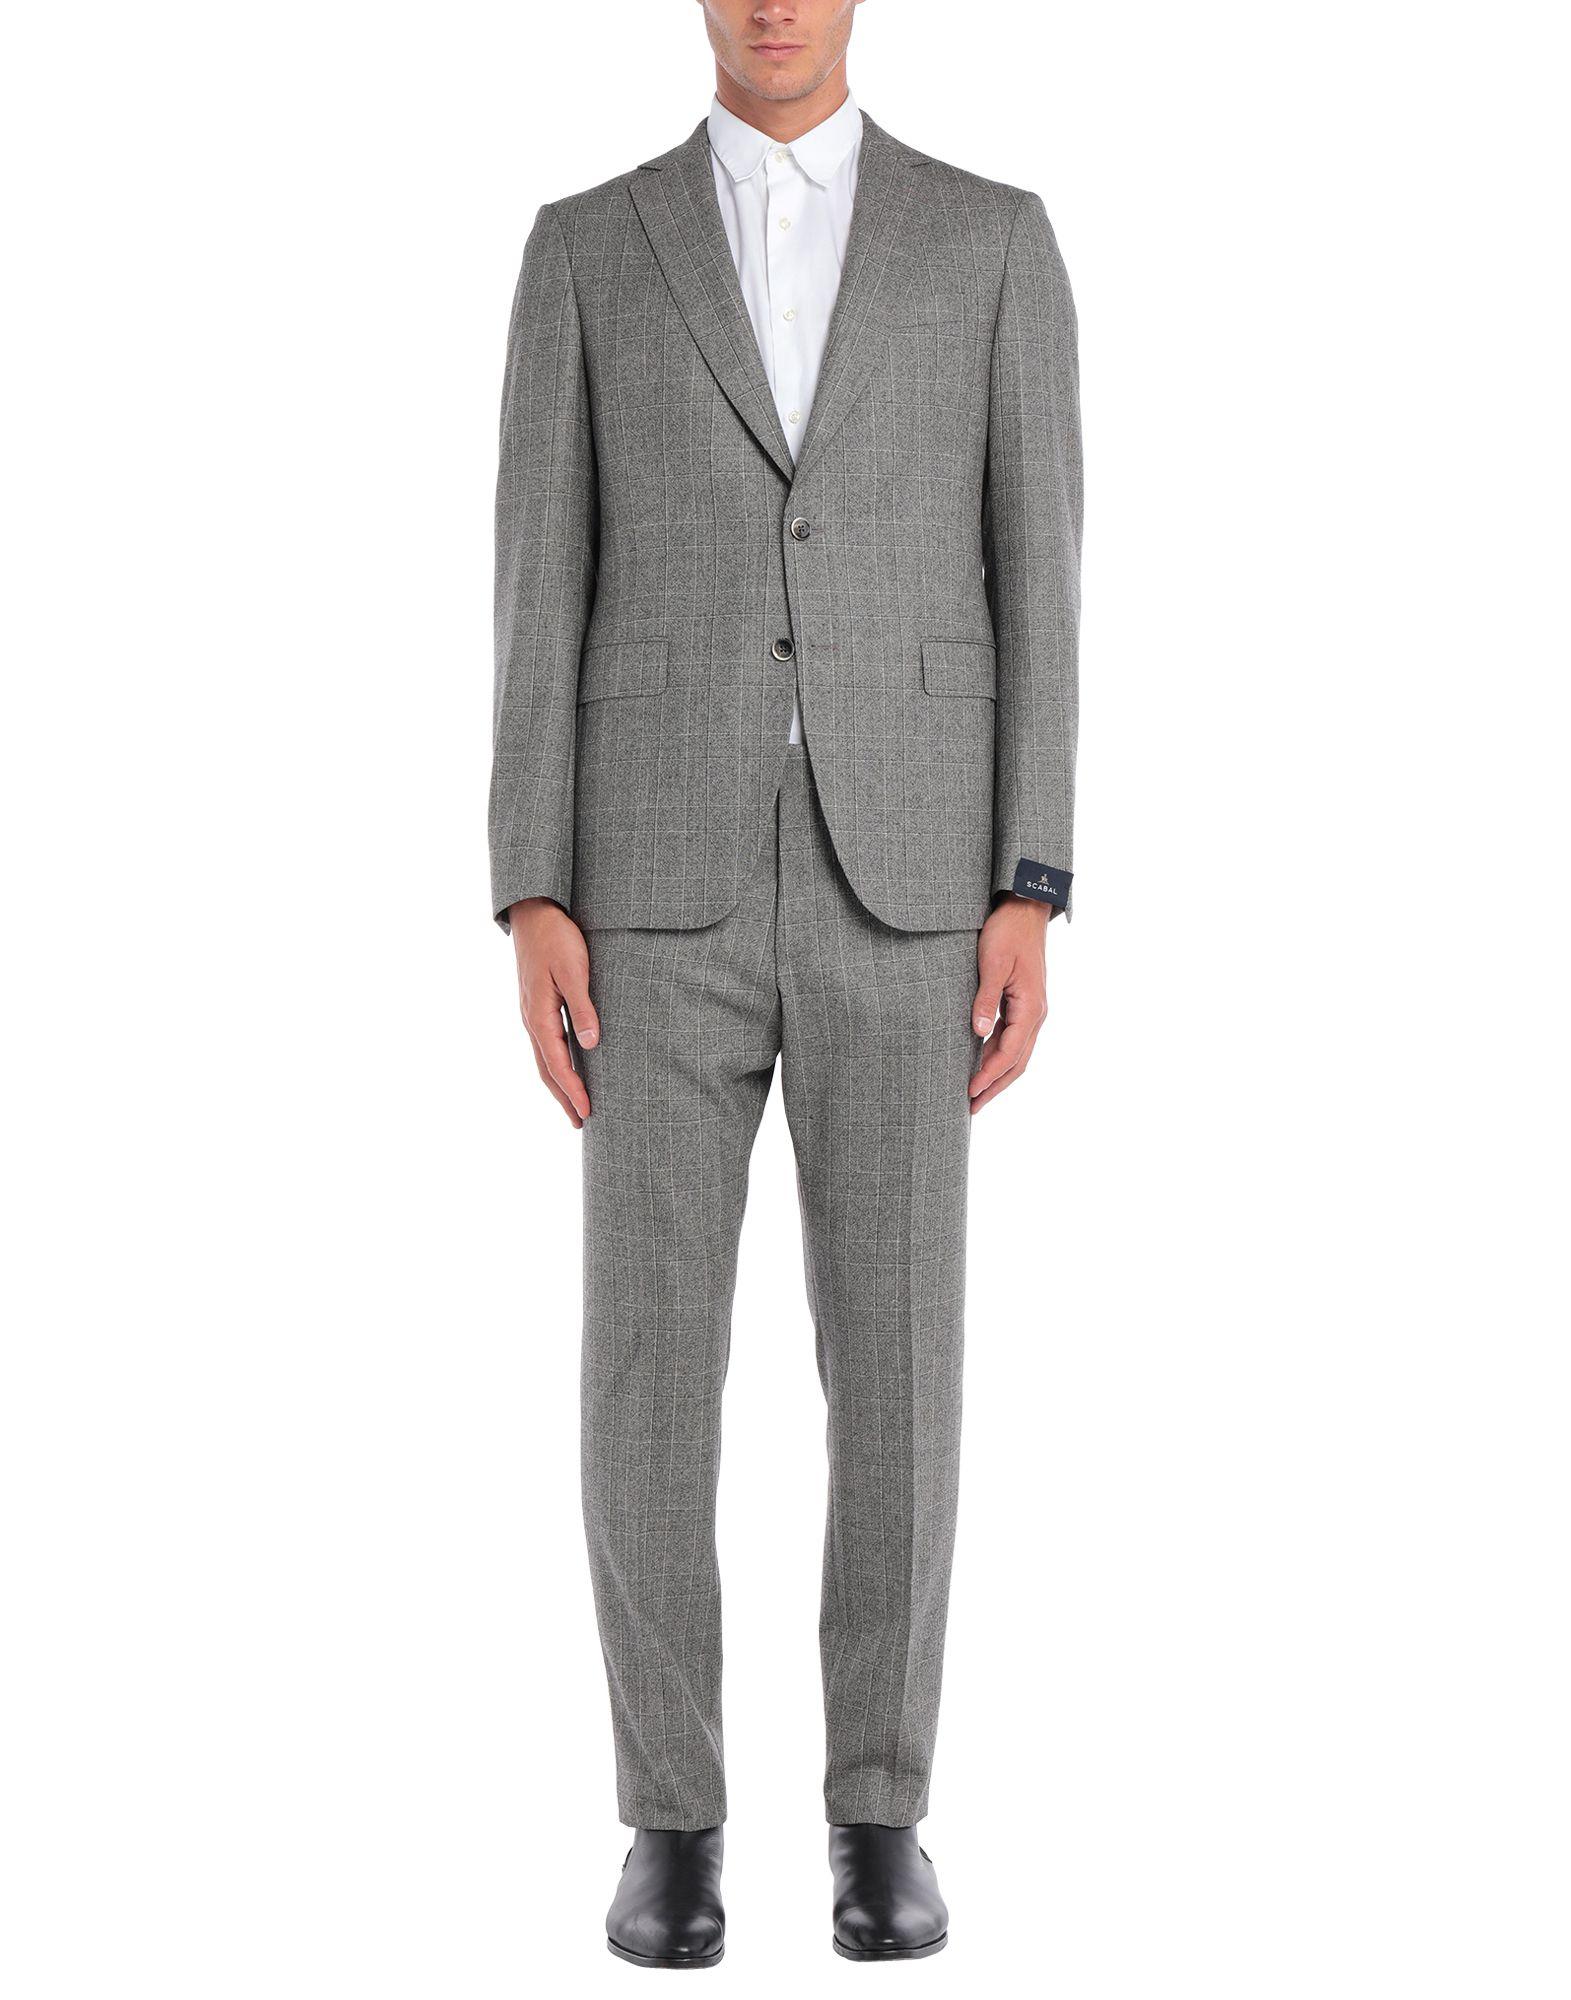 SCABAL® Flannel Suit in Grey (Gray) for Men - Lyst